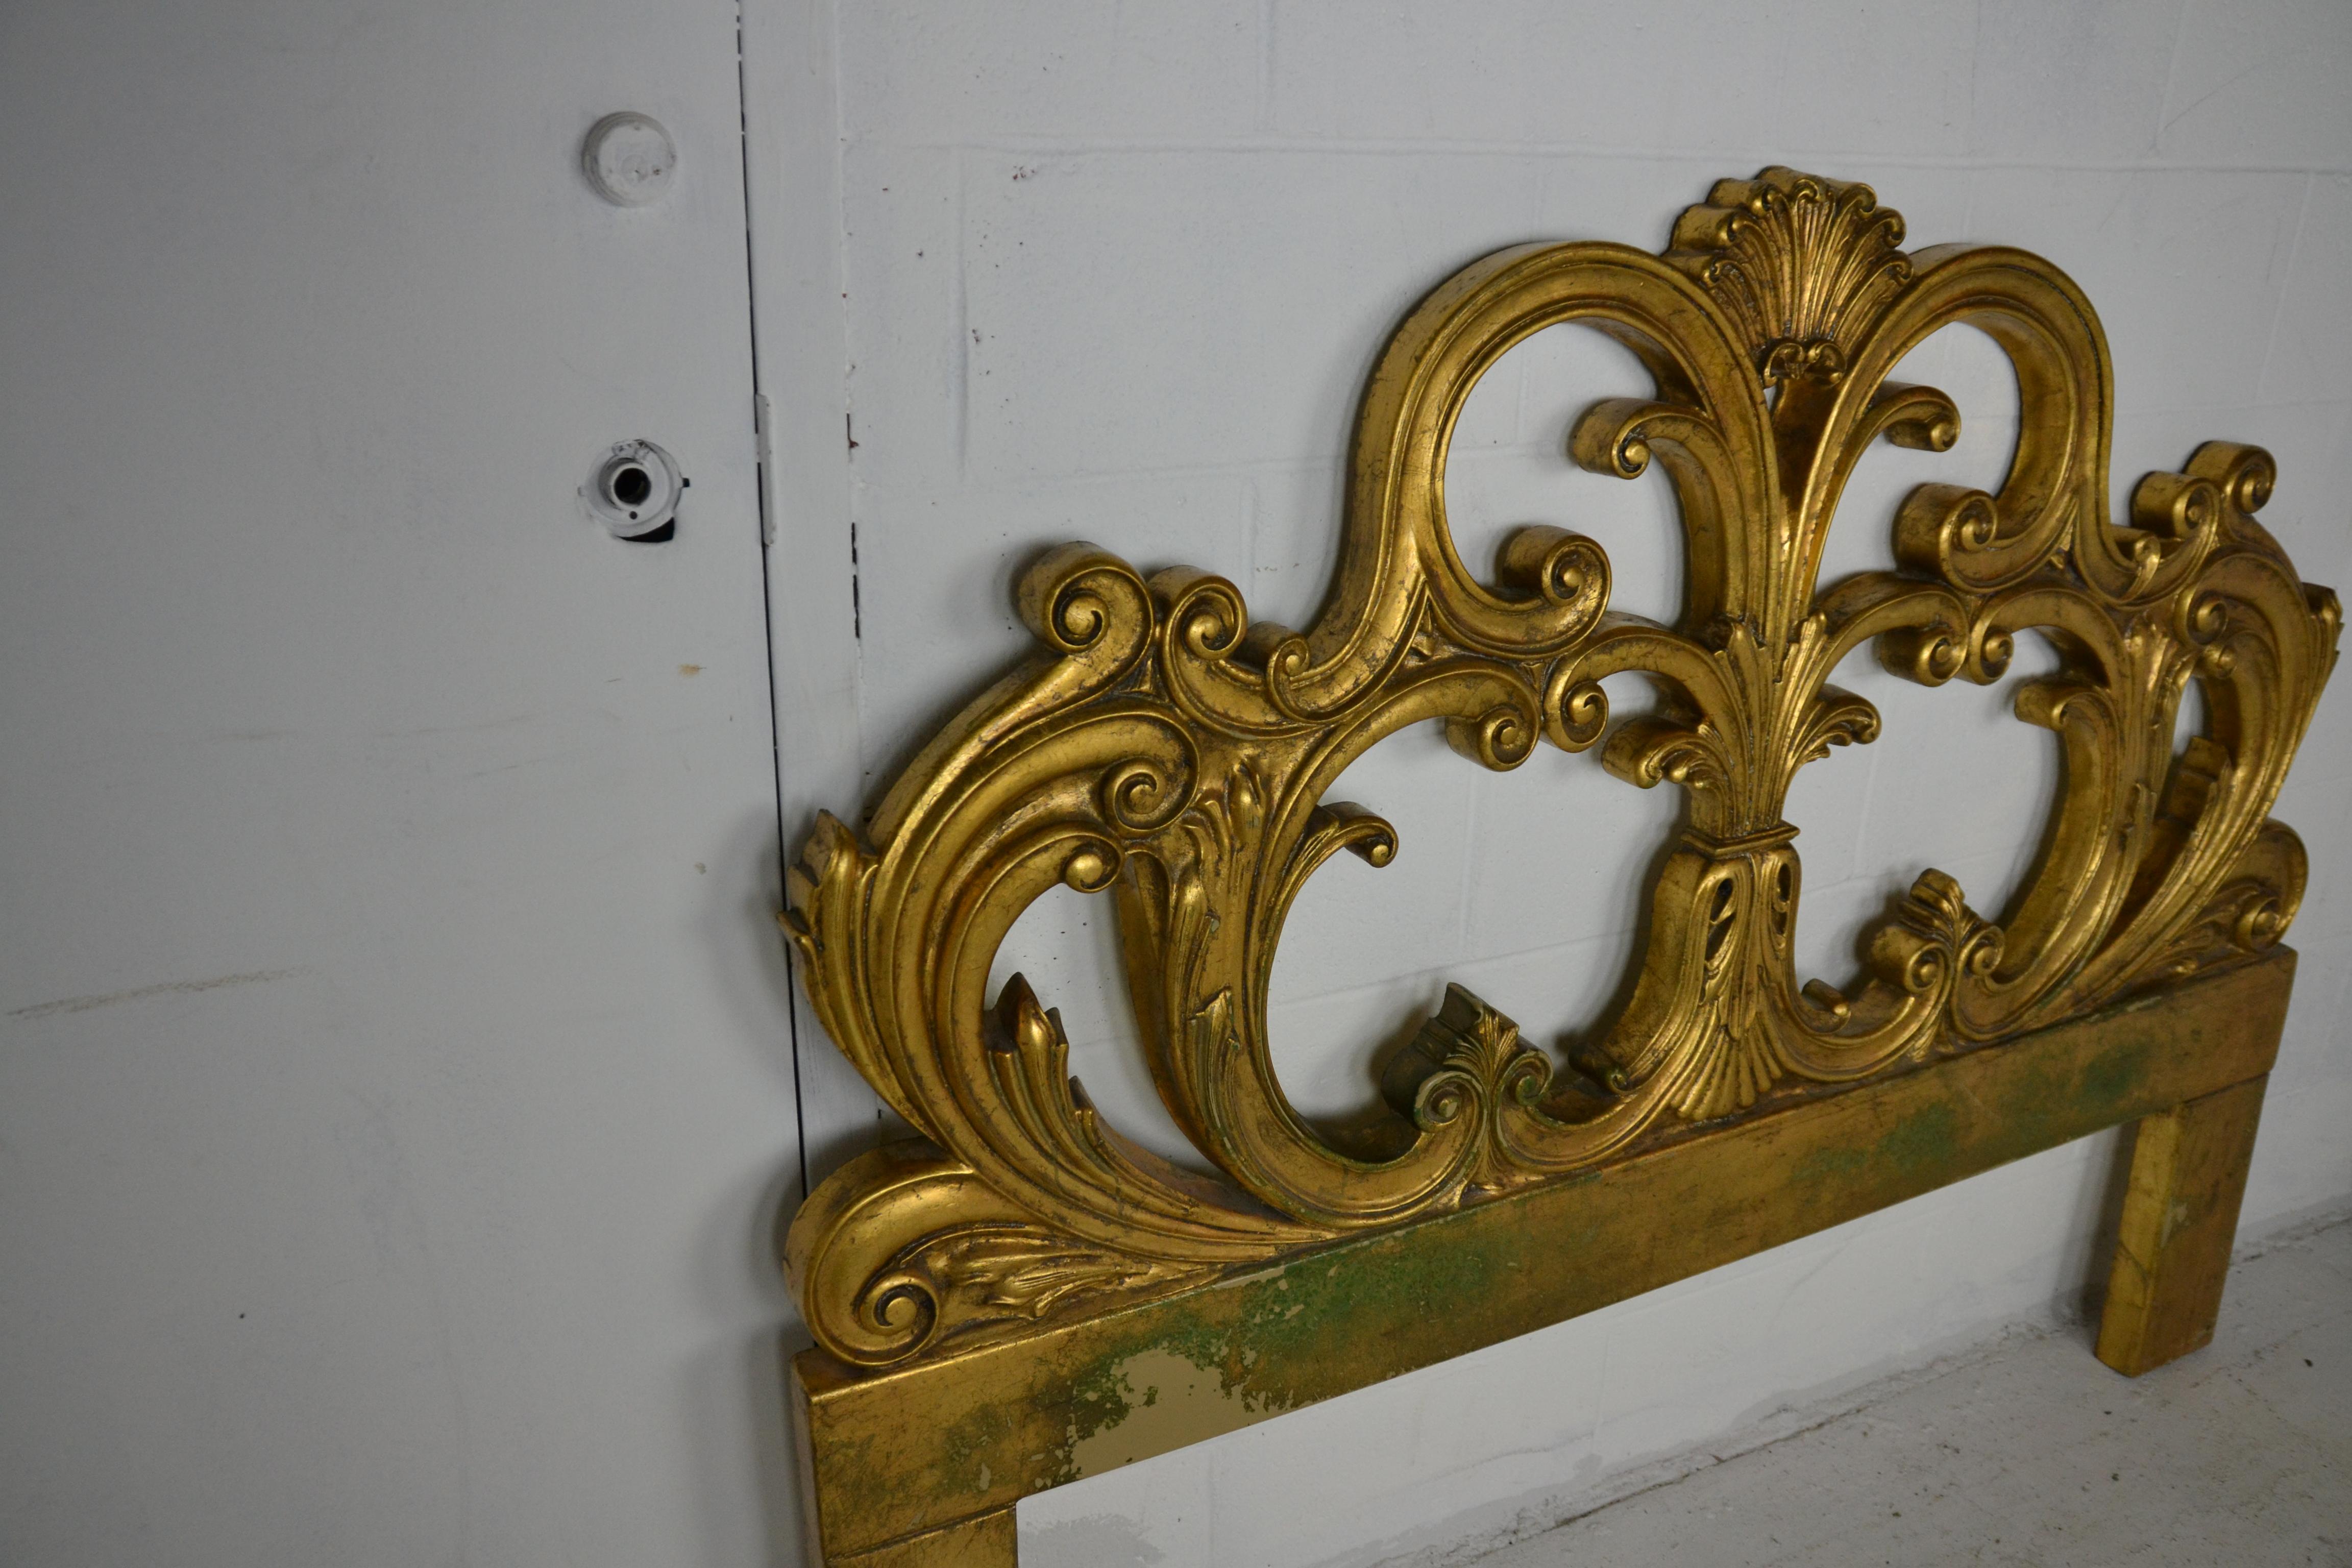 A gilded headboard decorated with scroll-work design. Acanthus leaf and shell motif.
Measures: Max width 60